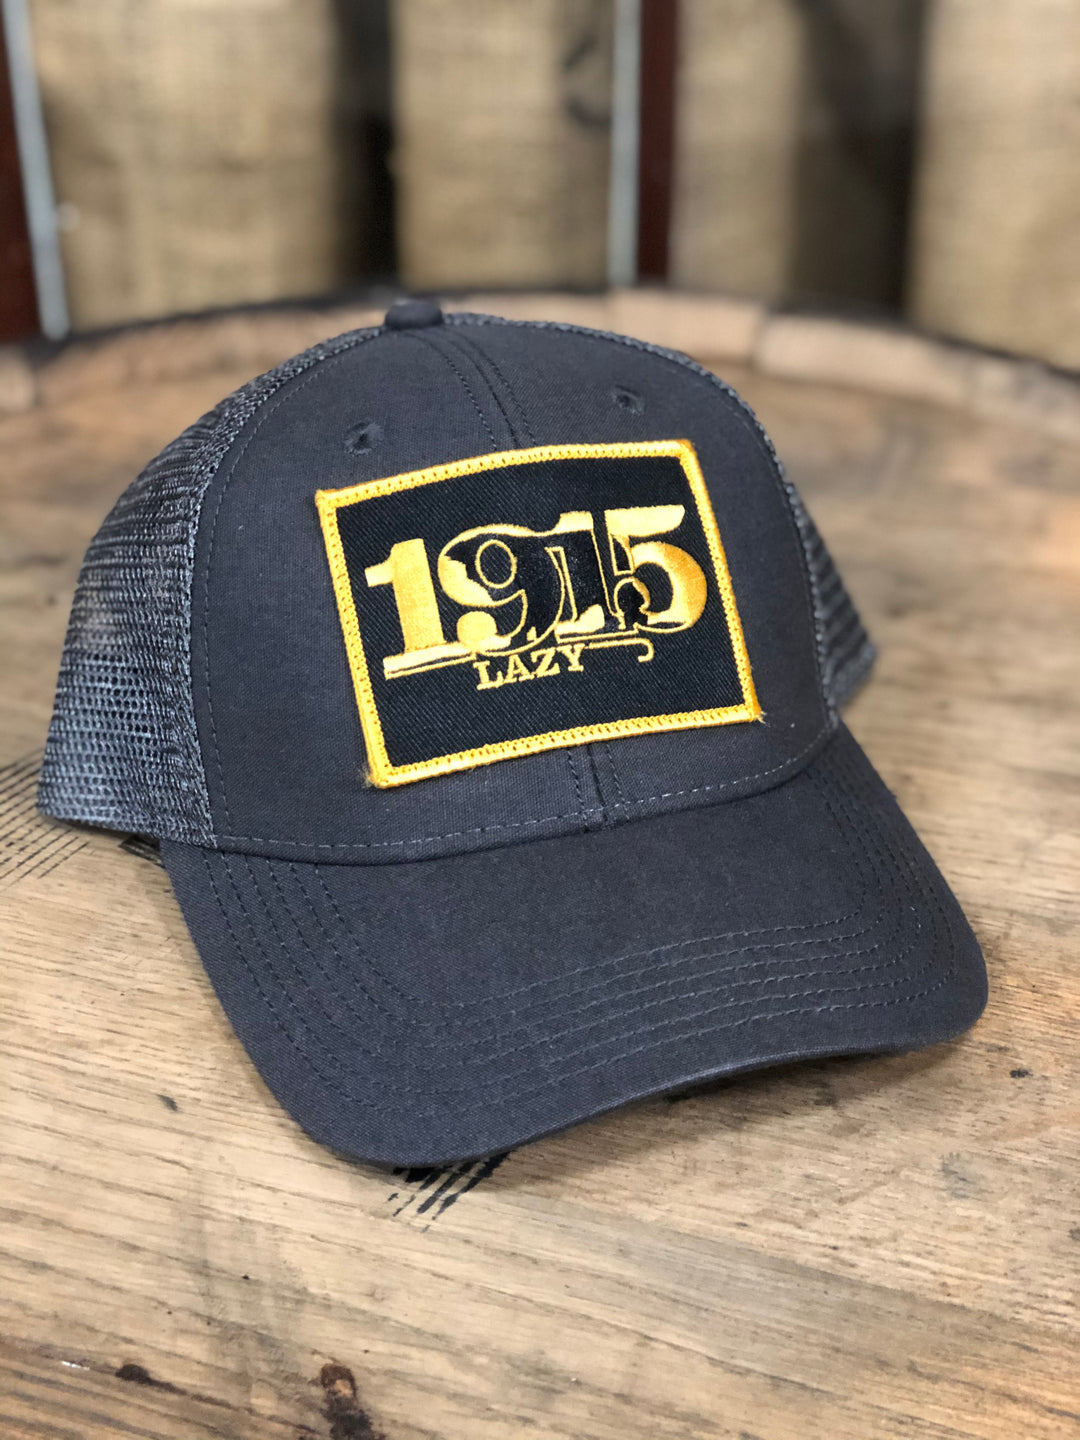 Lazy J Ranch Wear Charcoal & Charcoal Unstructured Retro 1915 Cap